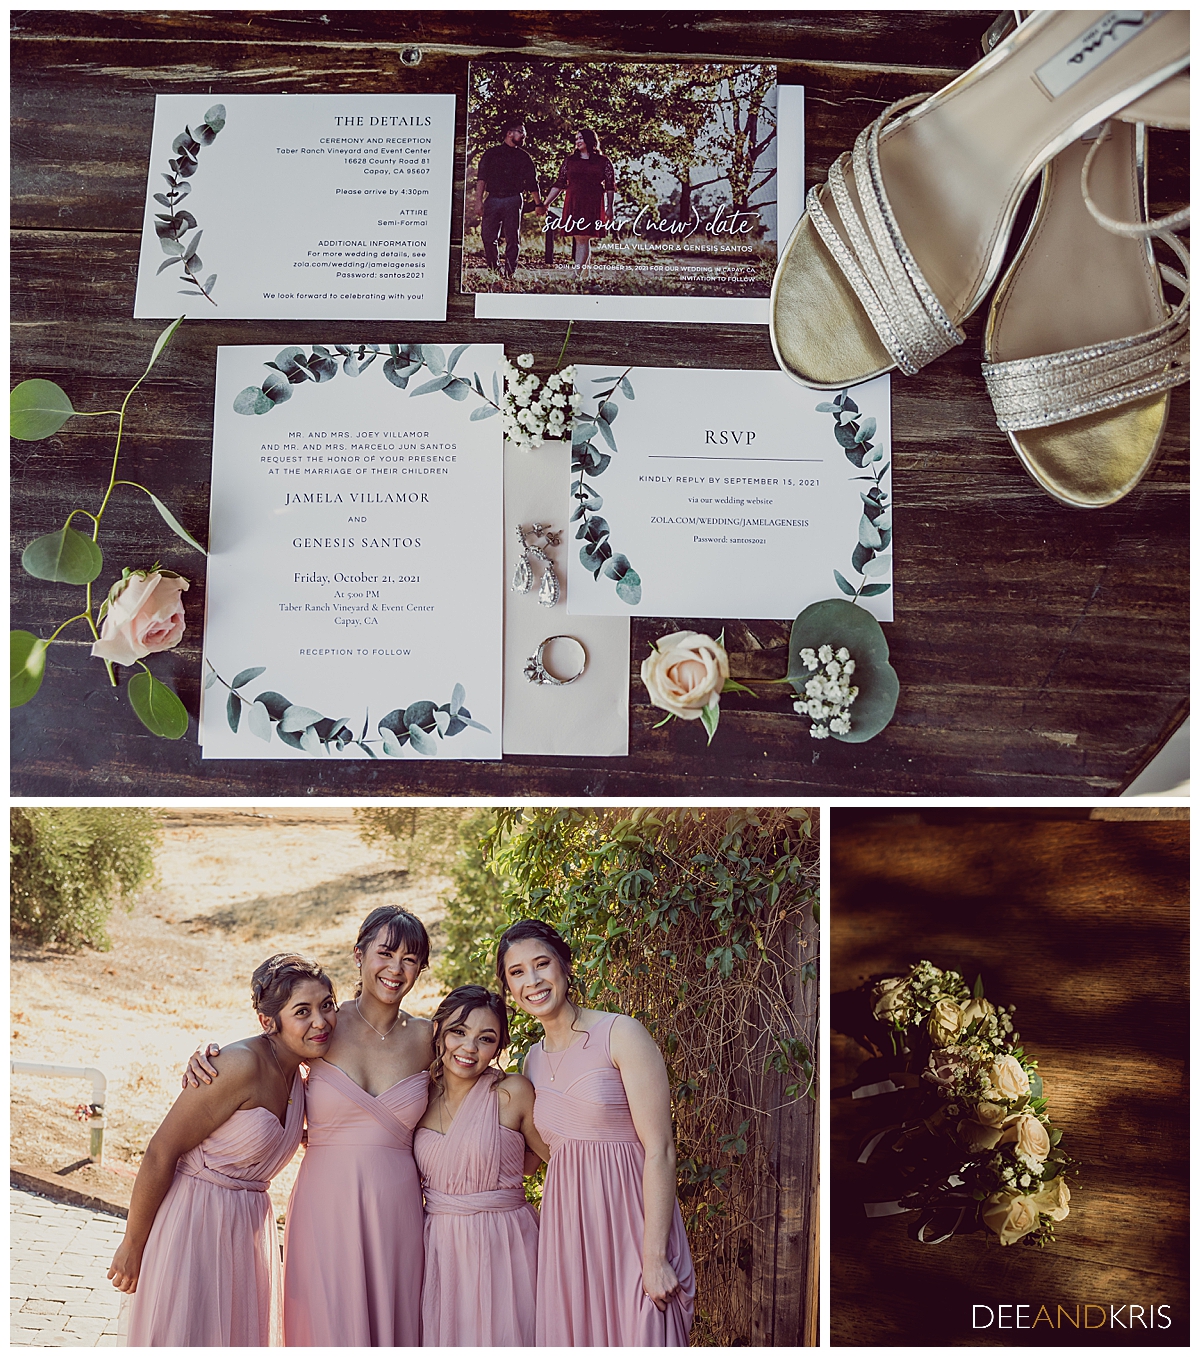 Three images of some wedding details; invitation stationary, bride's shoes, bride's bouquet, and bridesmaids in their dresses.